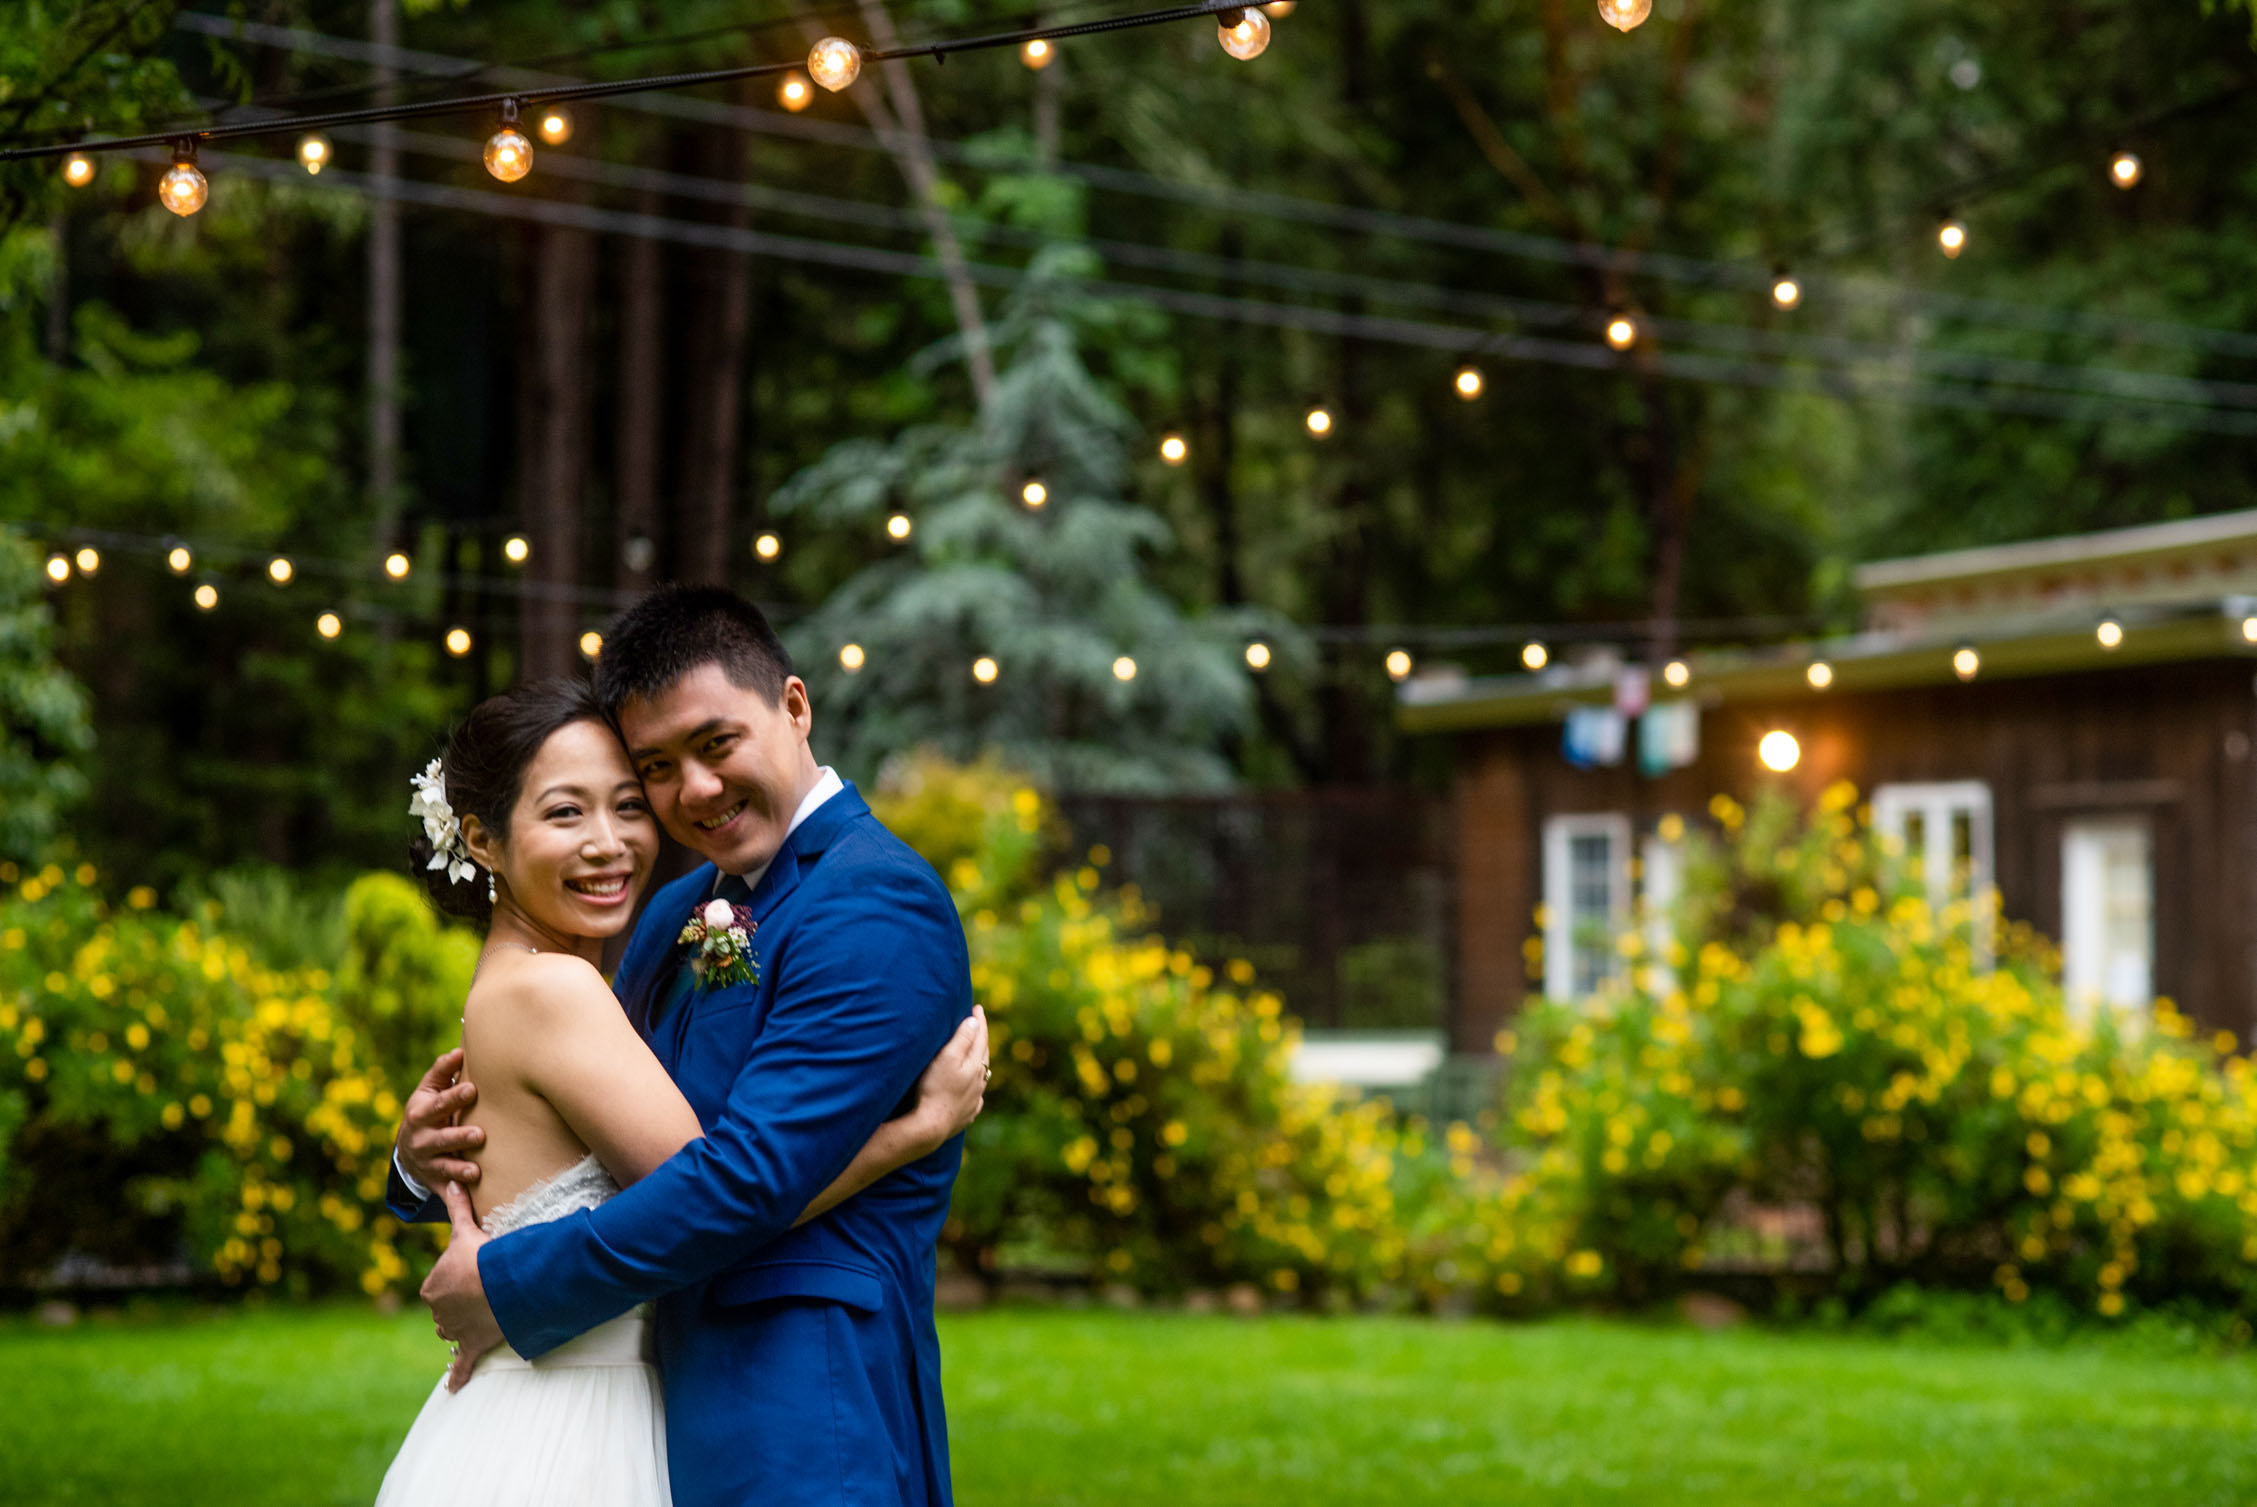 Bride and groom embrace on green lawn with string lights